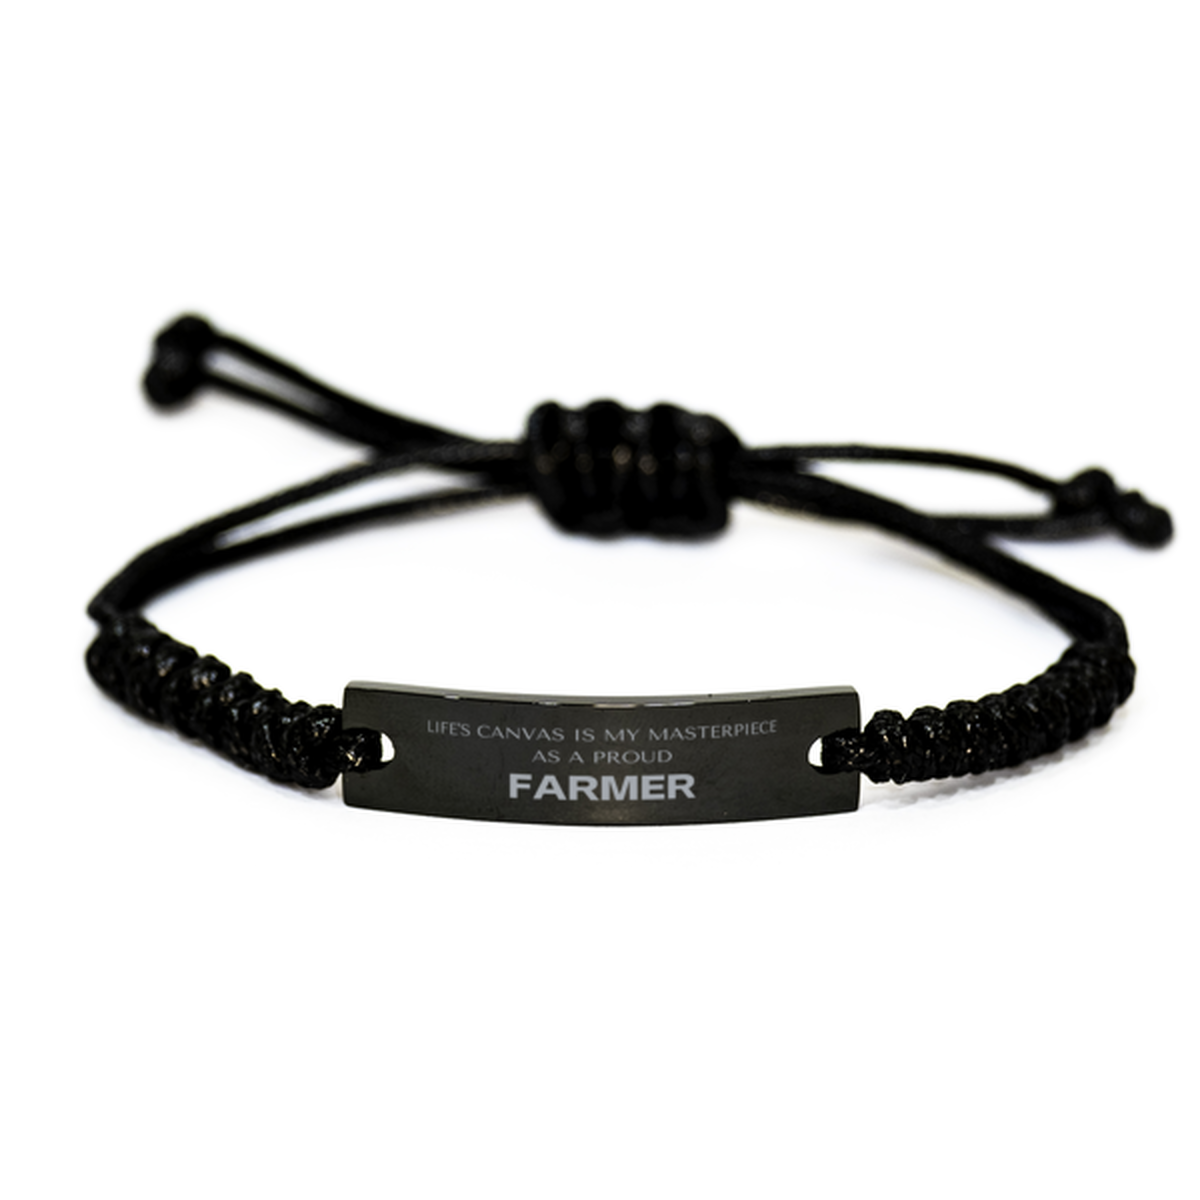 Proud Farmer Gifts, Life's canvas is my masterpiece, Epic Birthday Christmas Unique Black Rope Bracelet For Farmer, Coworkers, Men, Women, Friends